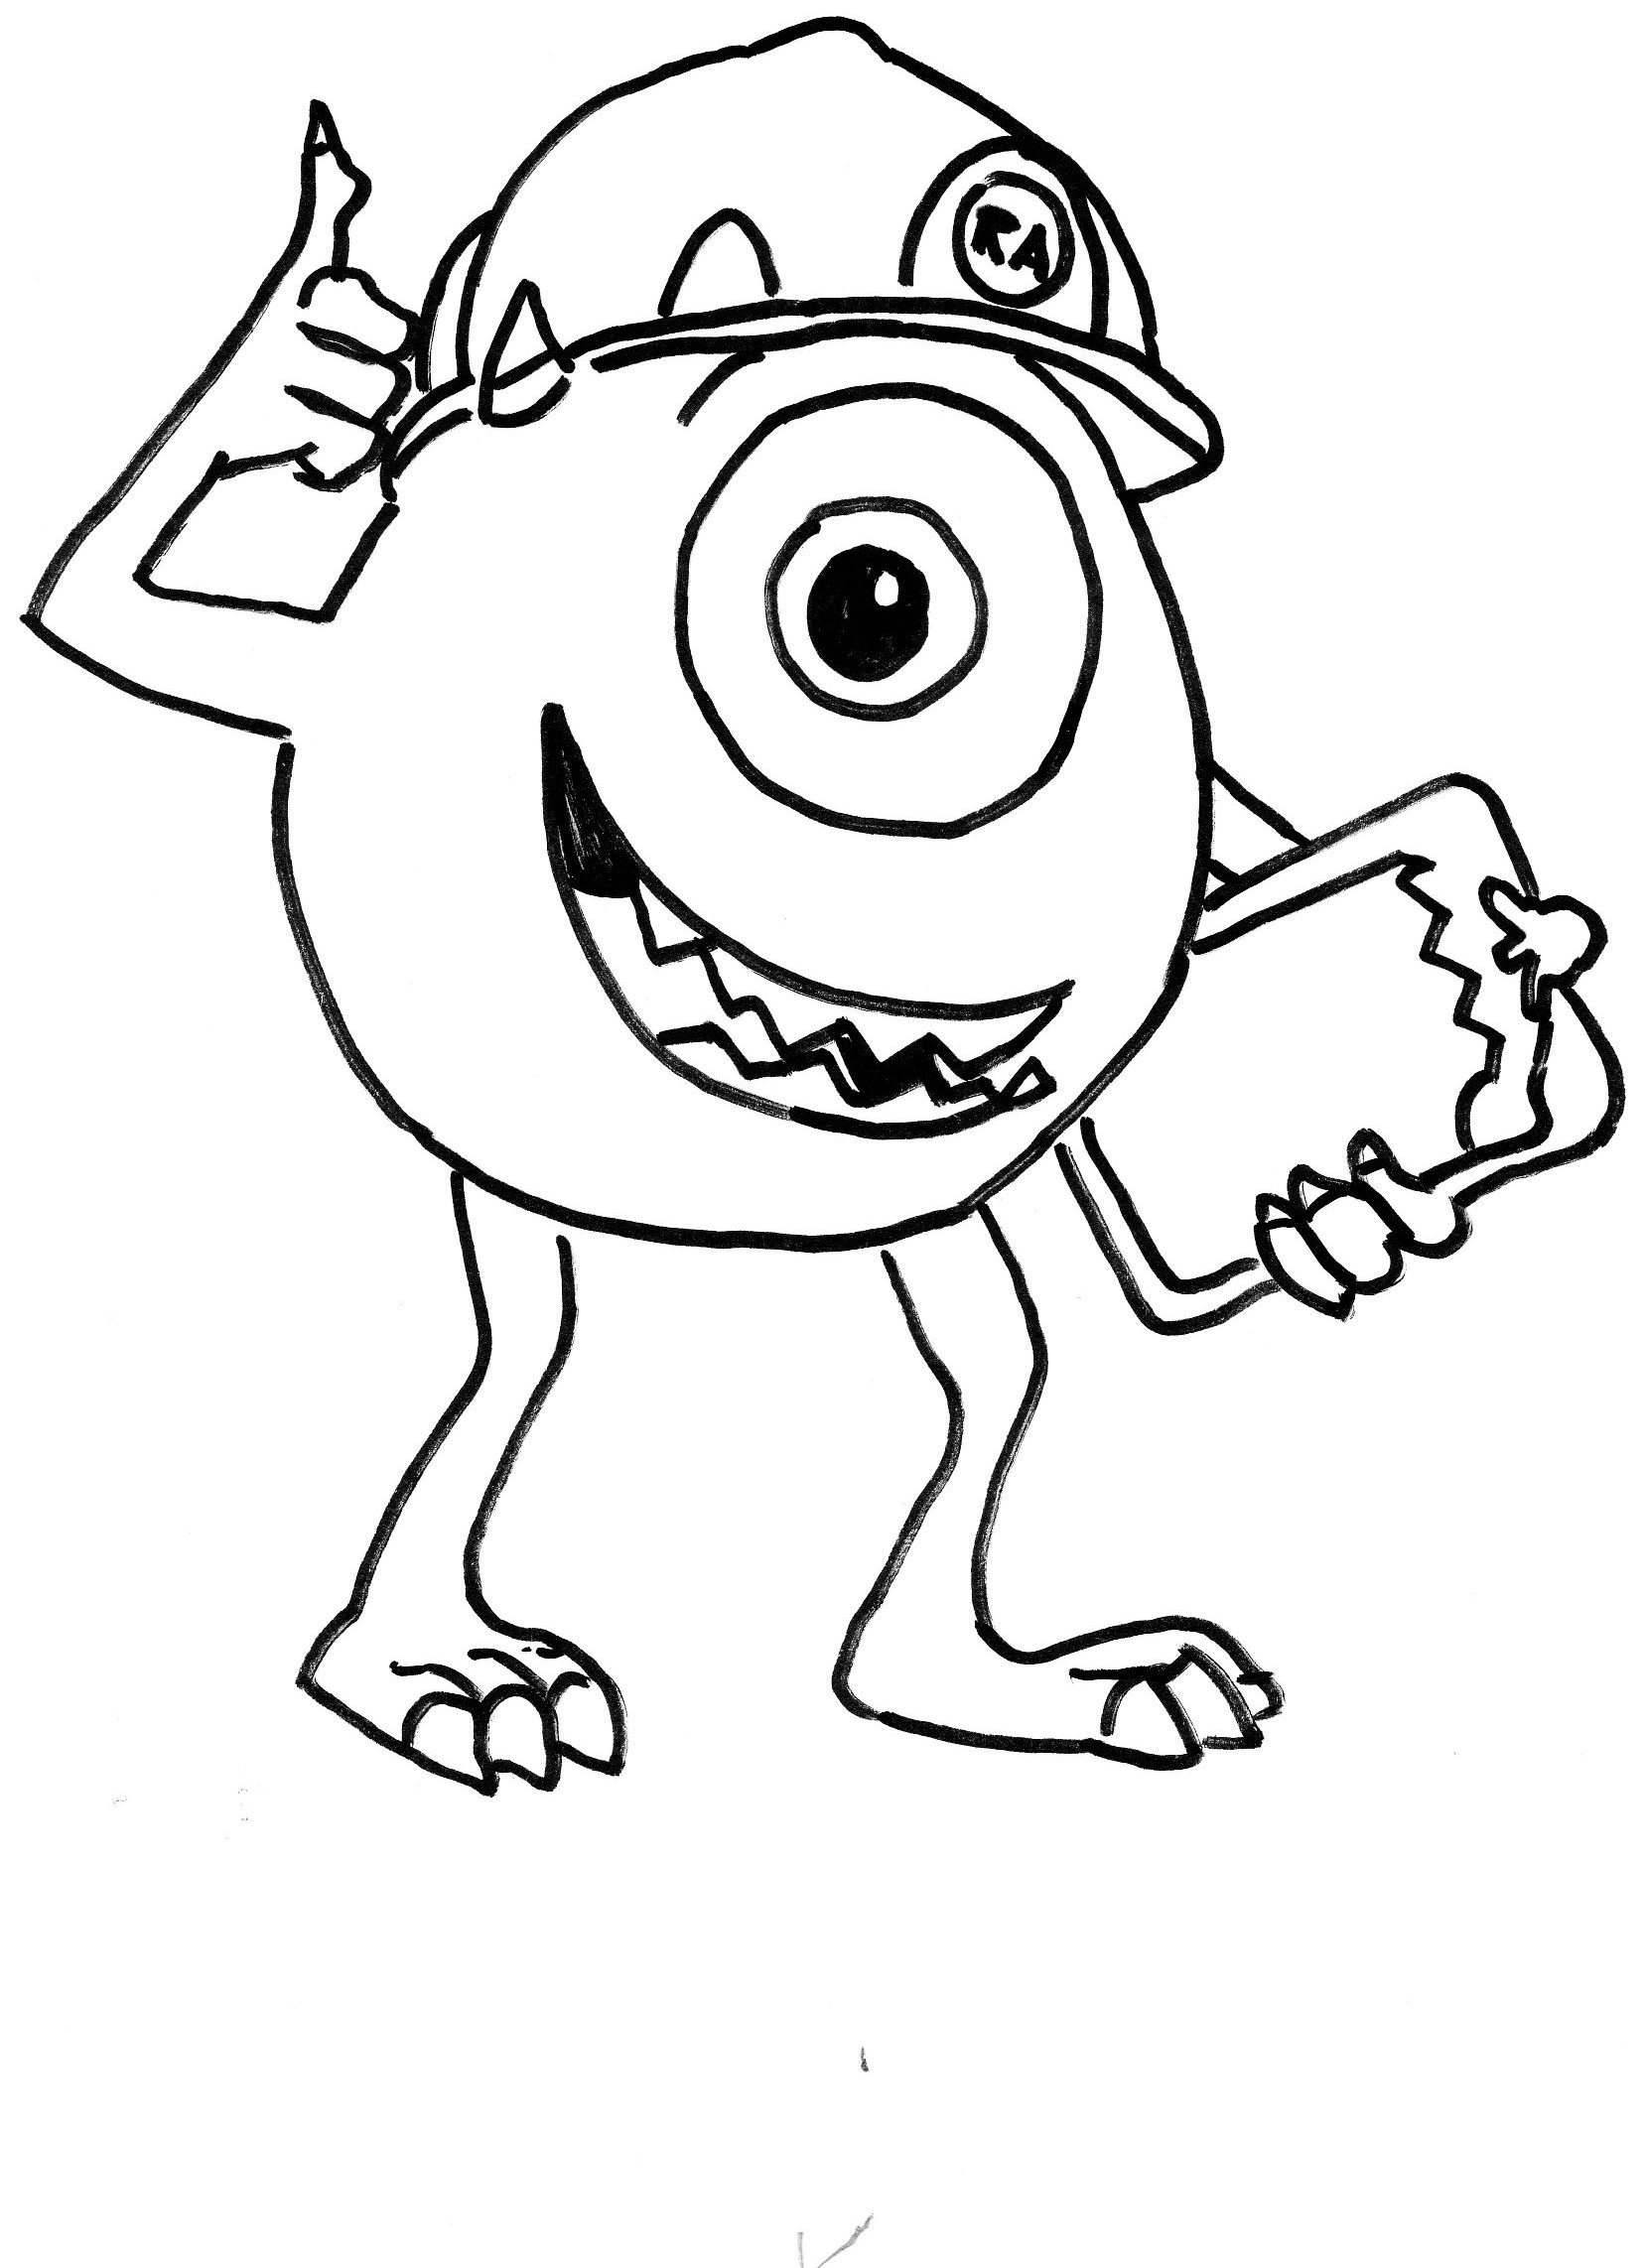 Free Coloring Pages For Boys Mandalon
 Coloring Pages for Boys 2018 Dr Odd